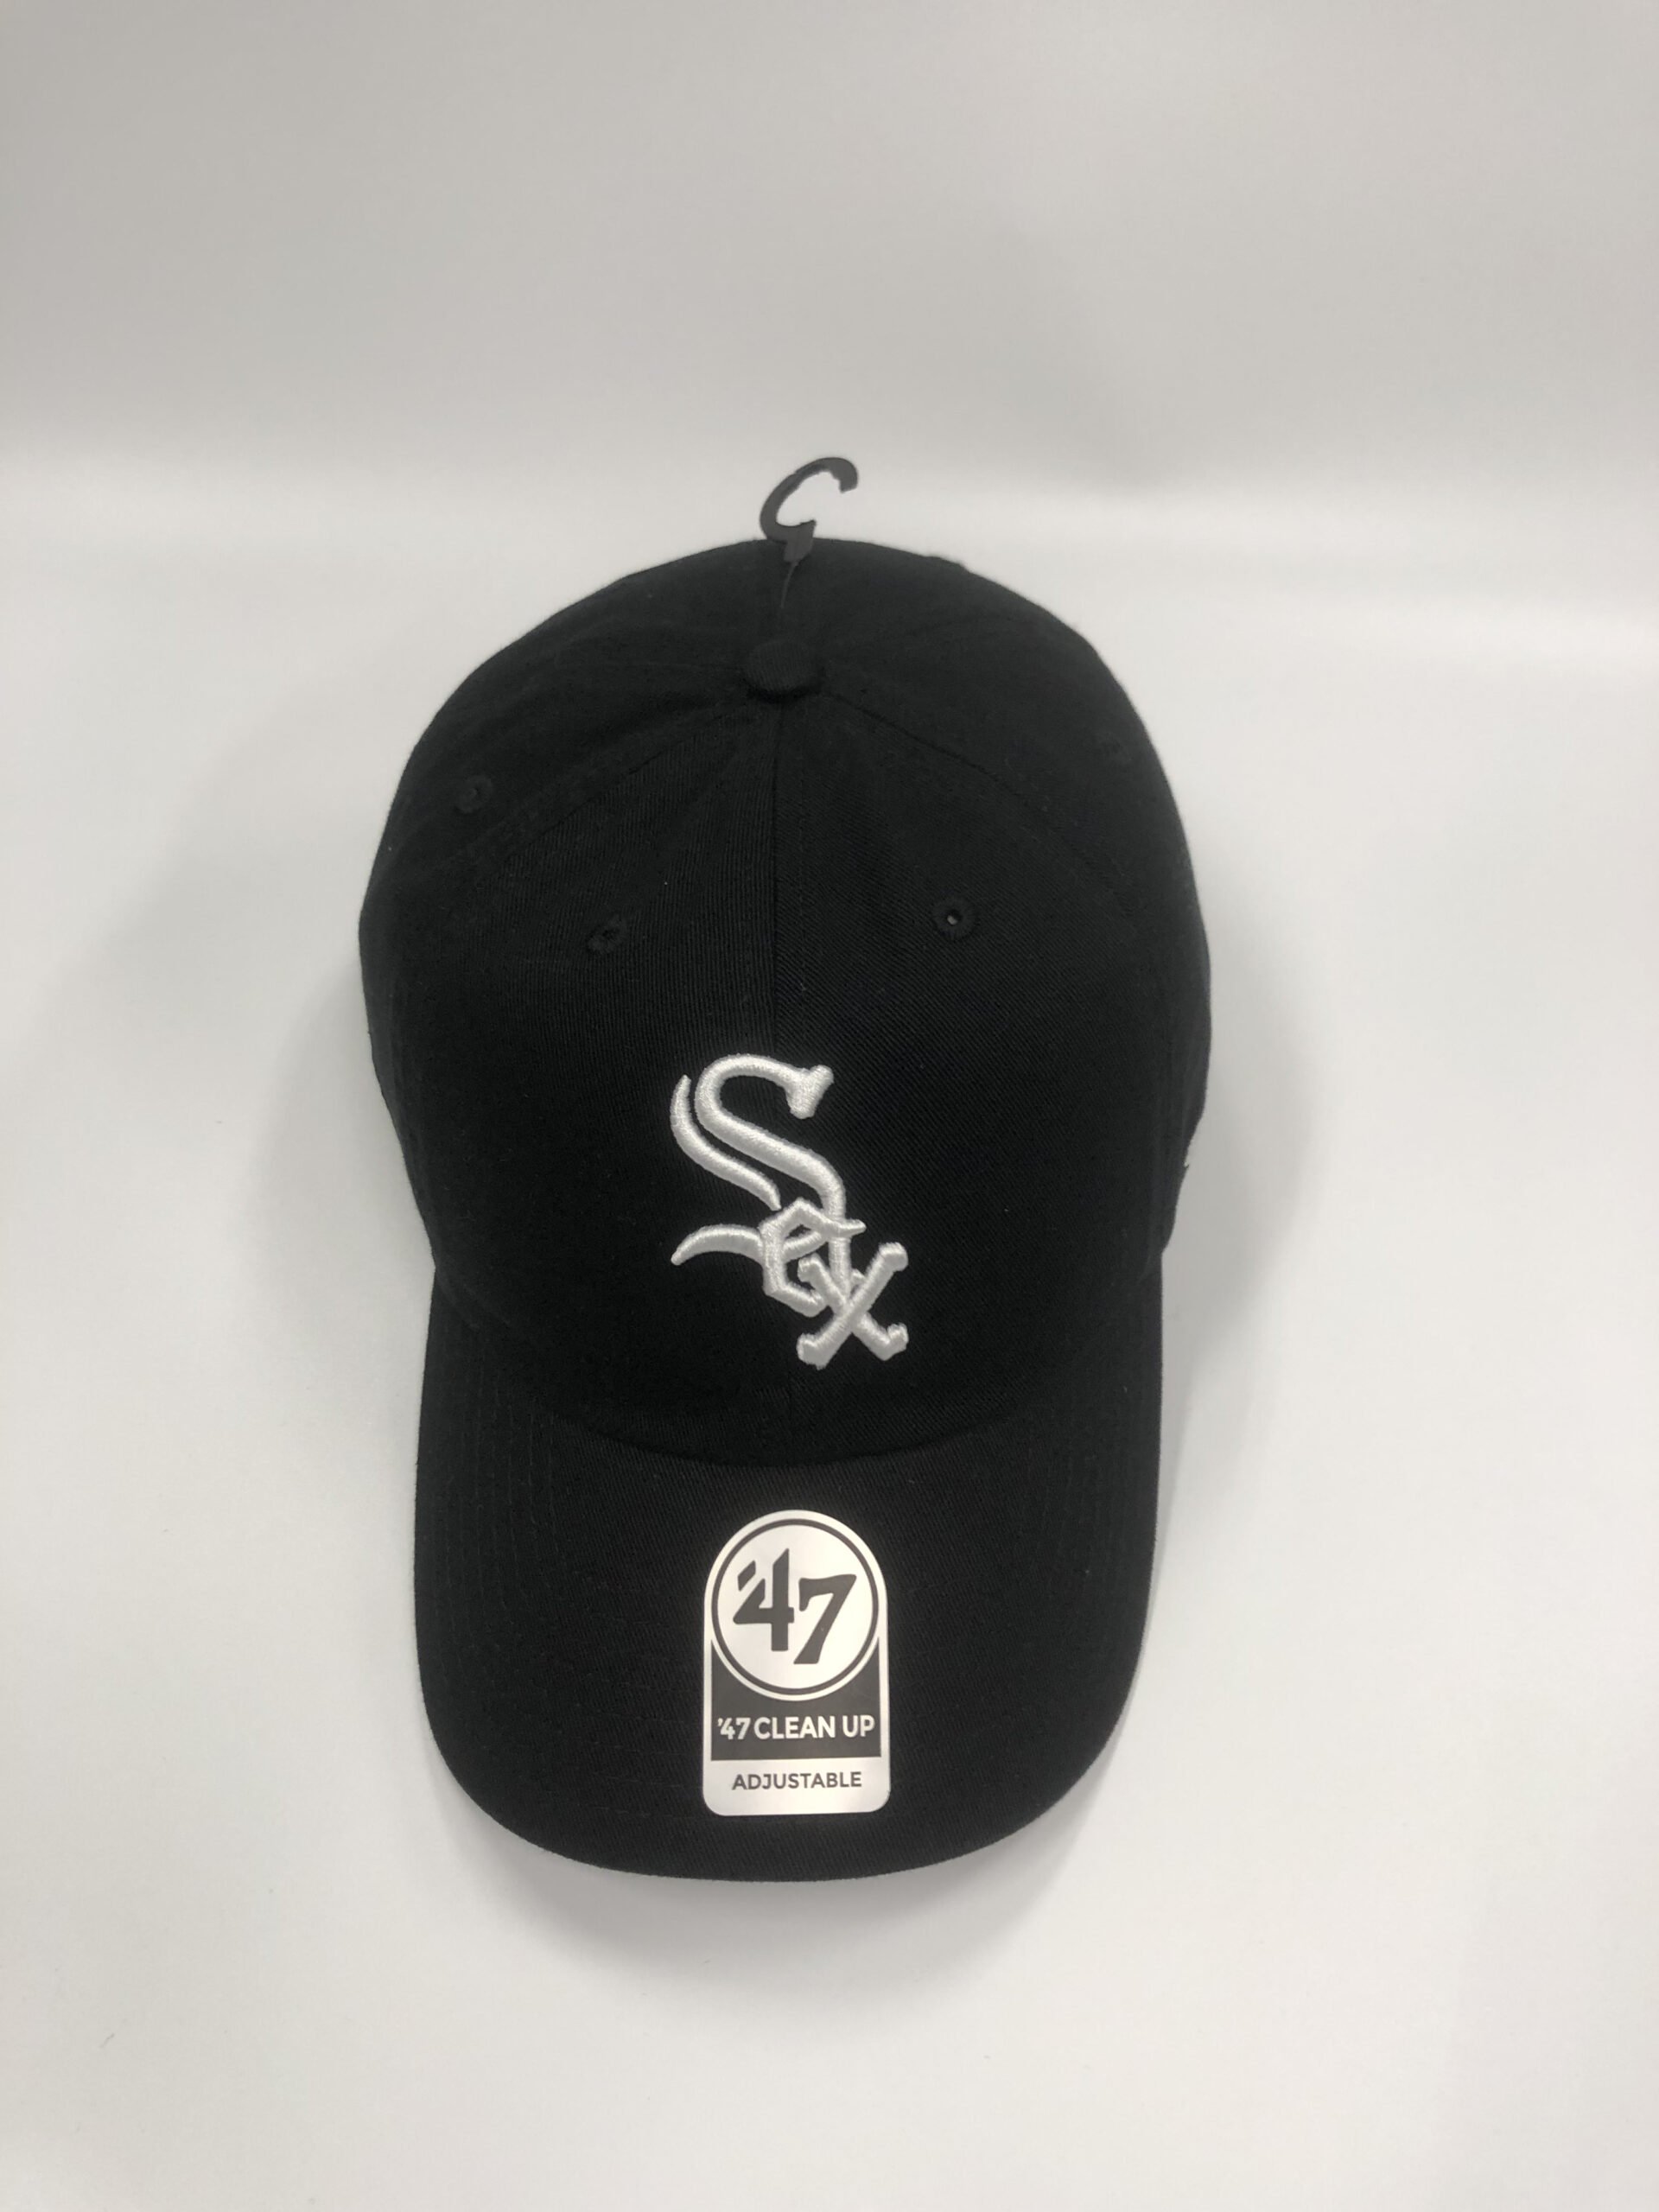 White sox Home’47 CLEAN UP Black